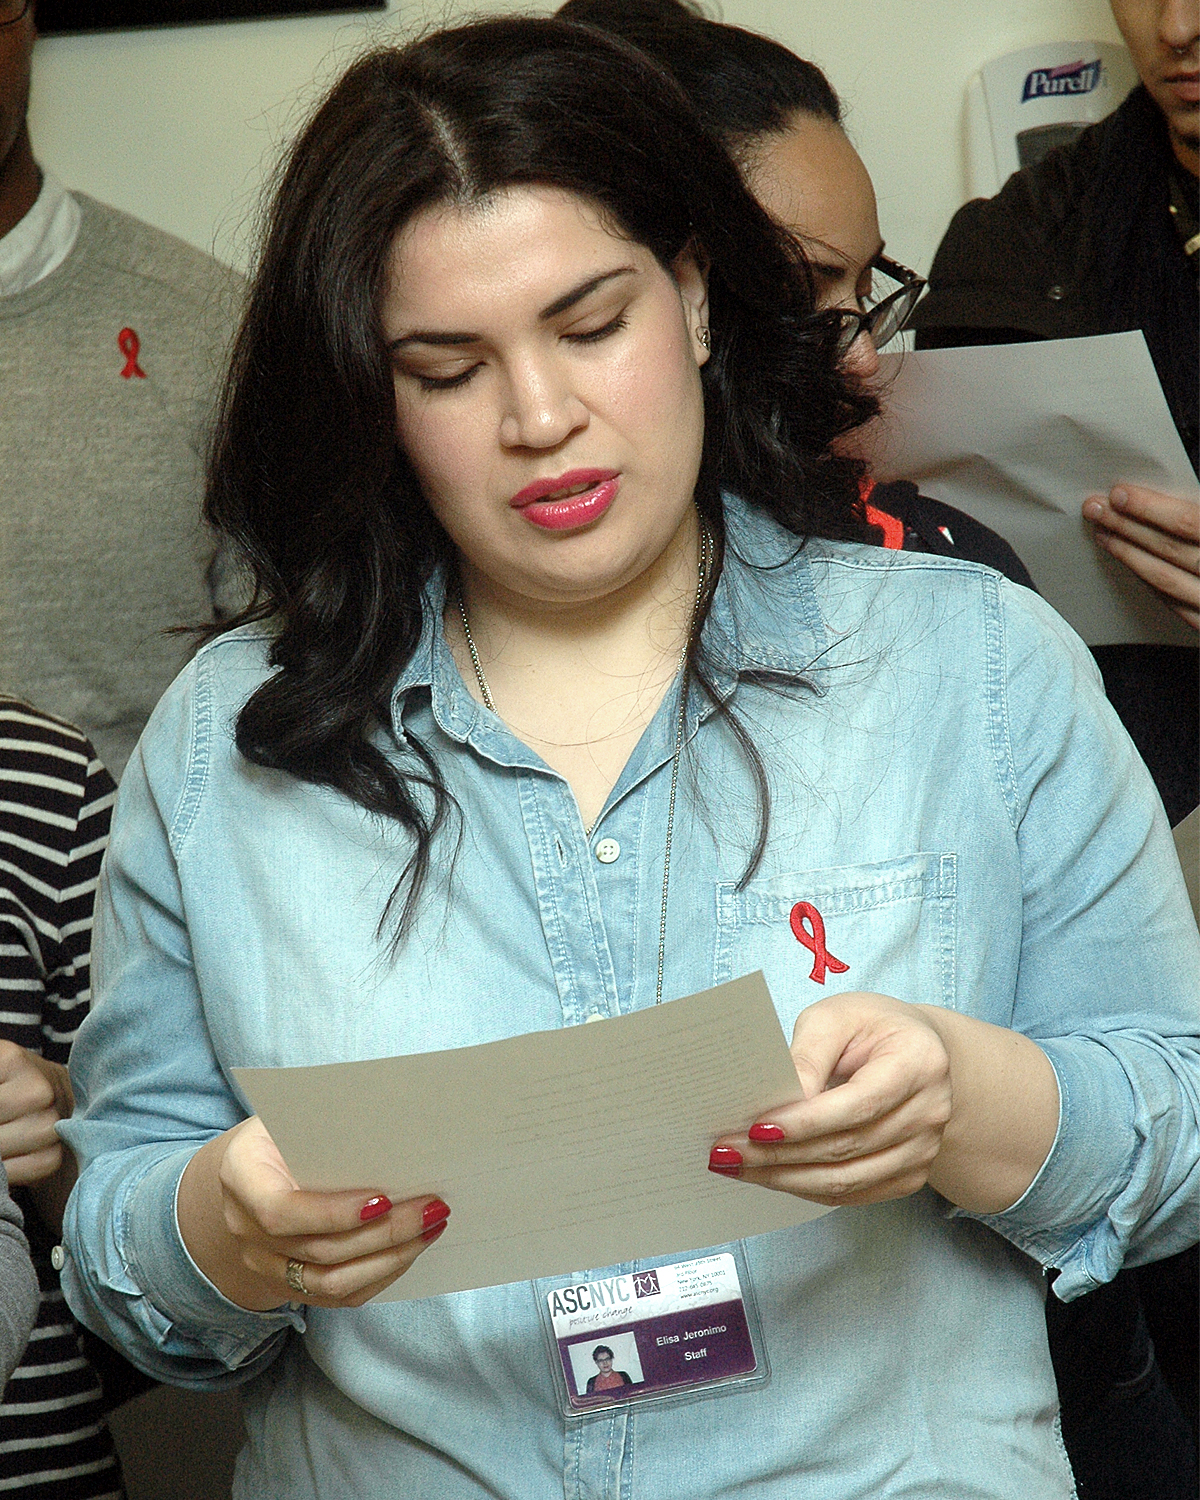 AIDS In Our Community: Reading of Names - Elise Jeronimo